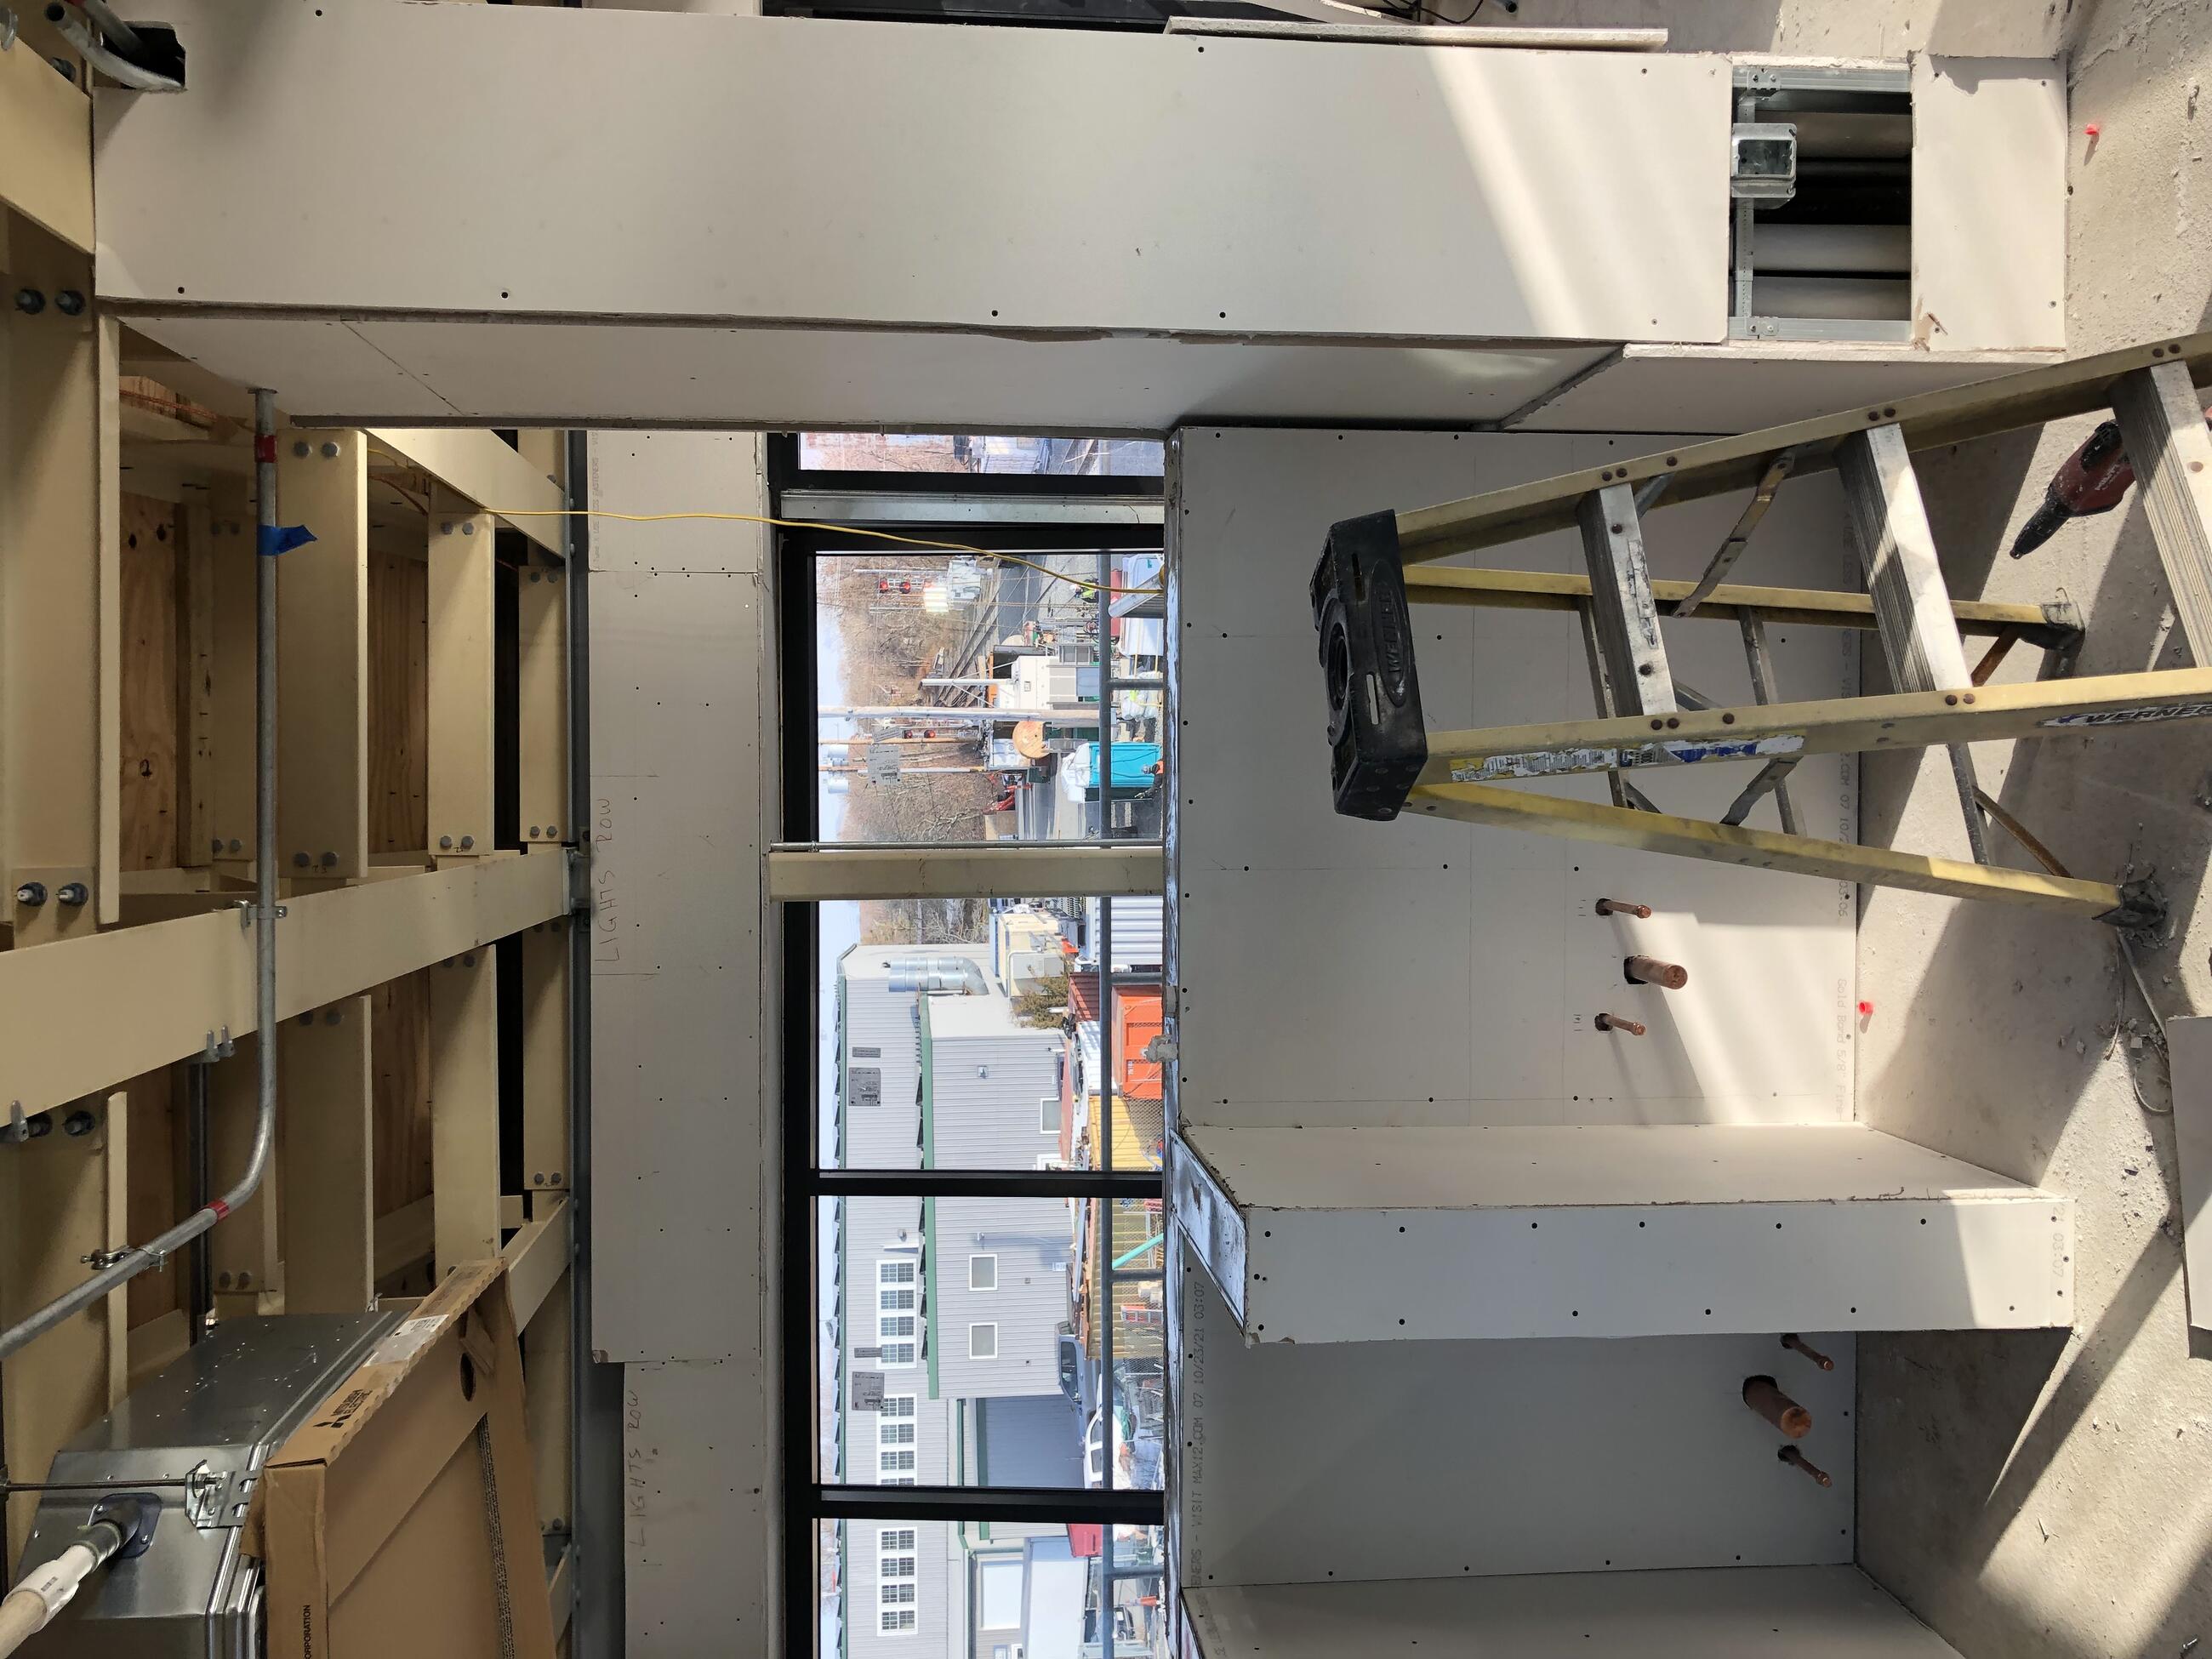 A view of the interior of the control tower facing toward the windows shows that drywall has been installed on walls and to create bays within the room. The ceiling has no drywall and is open so that rafters and beams are visible. 